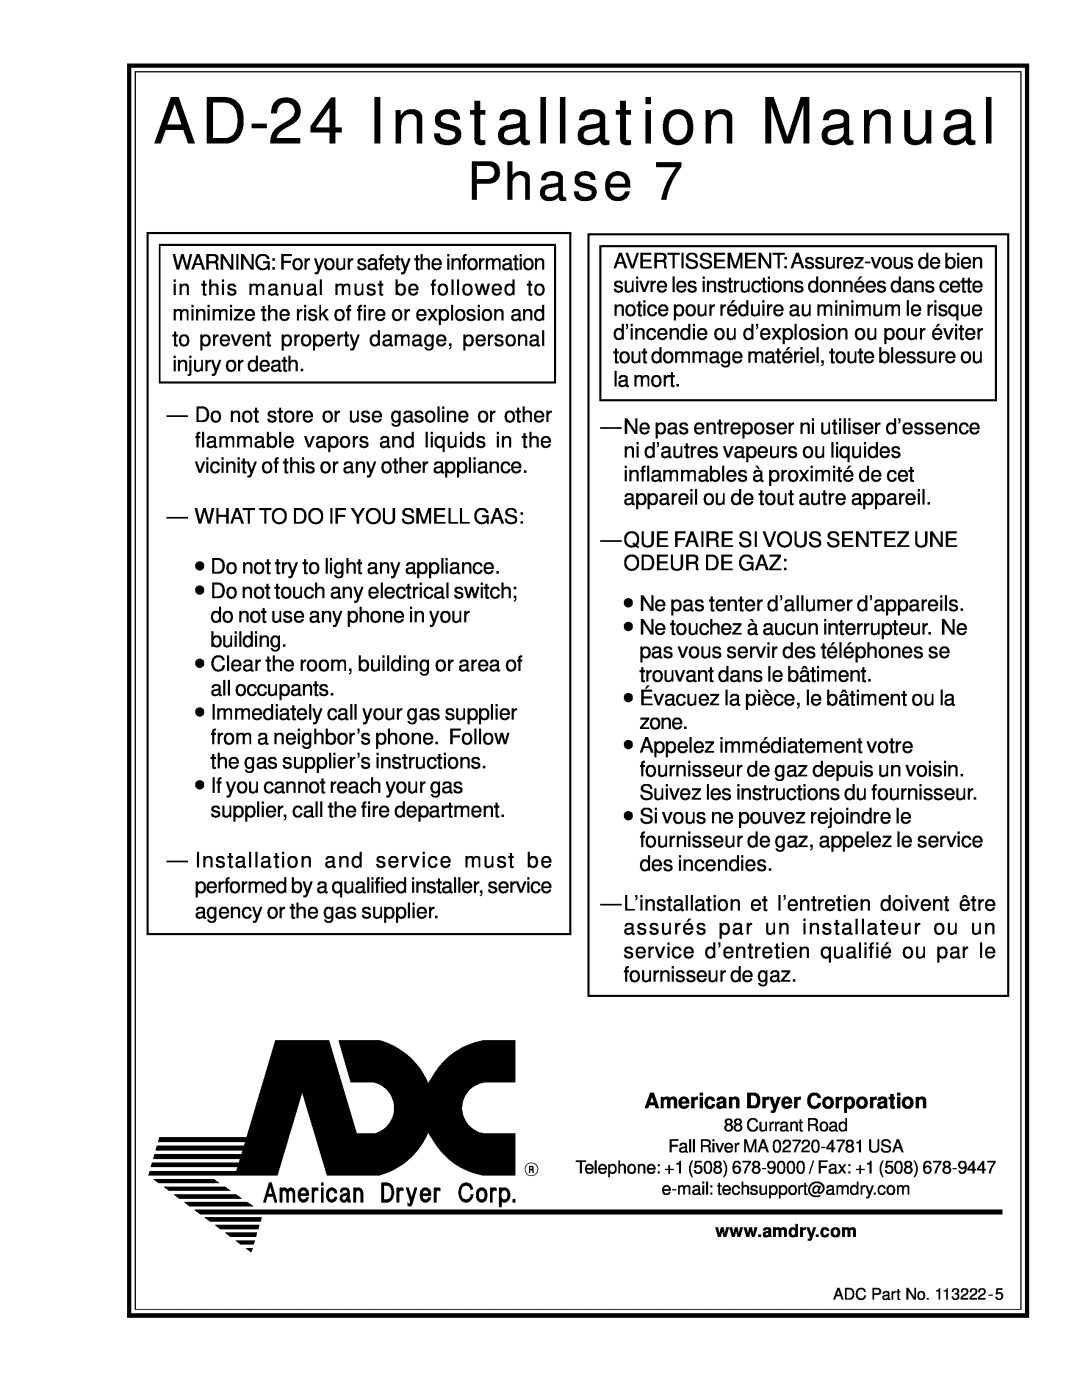 American Dryer Corp AD-24 Phase 7 installation manual AD-24 Installation Manual, American Dryer Corporation 